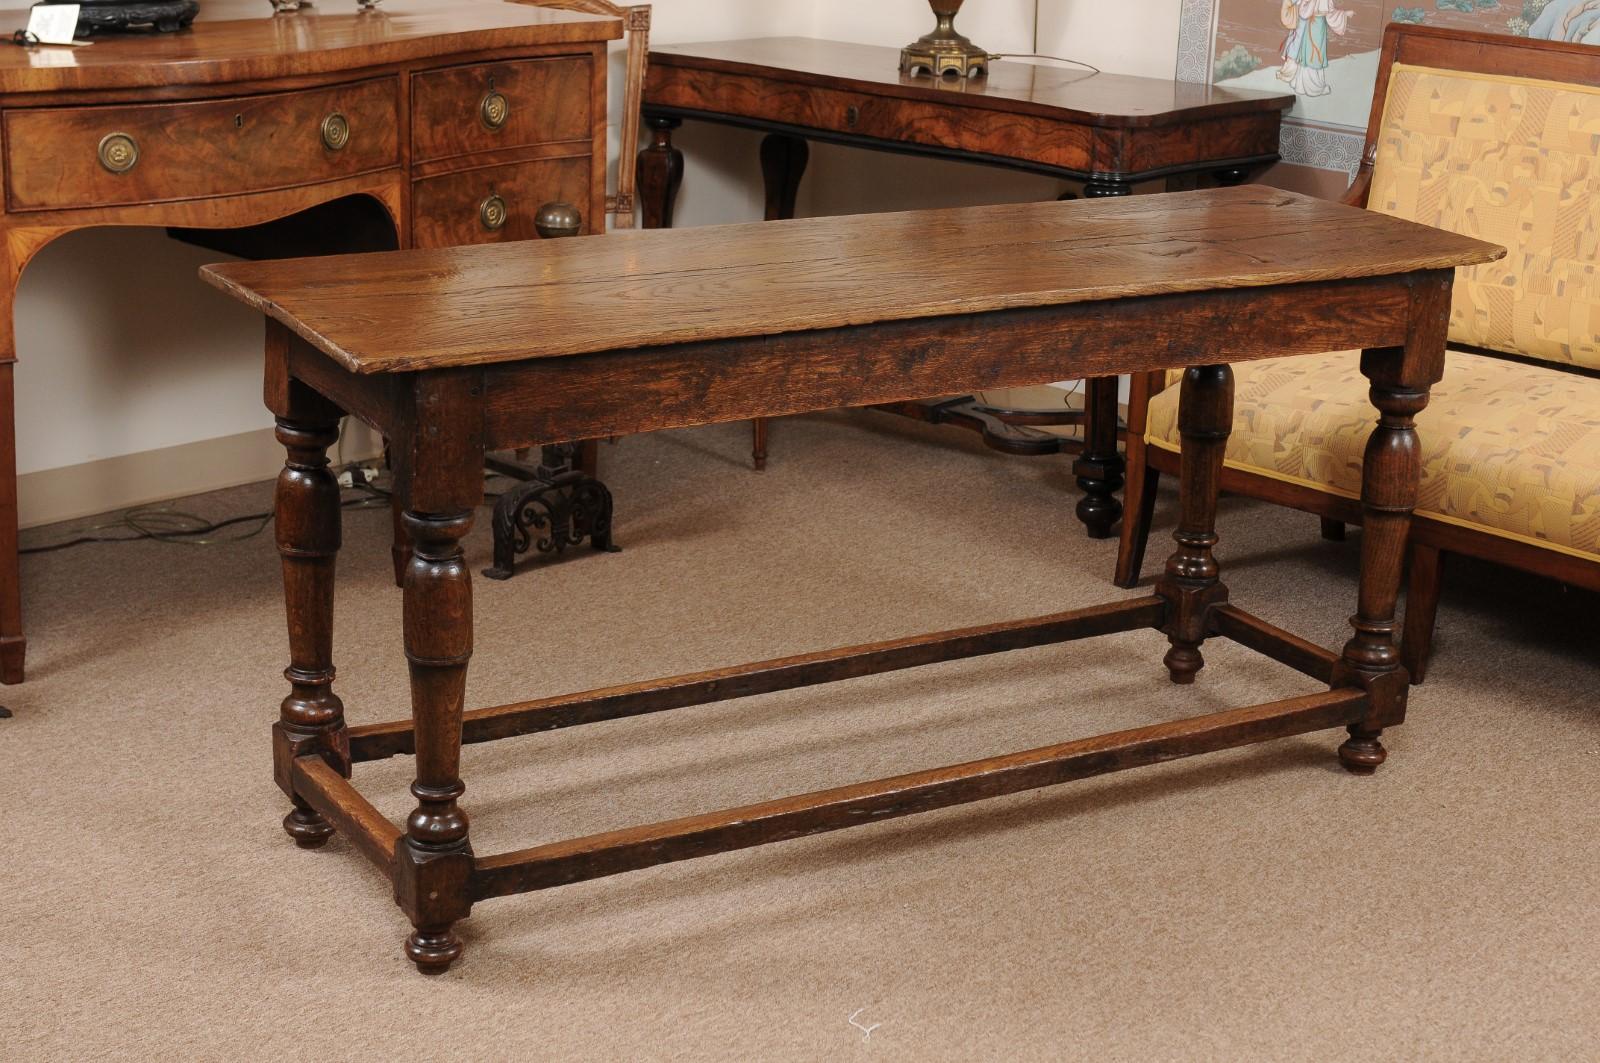 An English oak refectory table dating from the mid-19th century with turned legs and box stretcher.